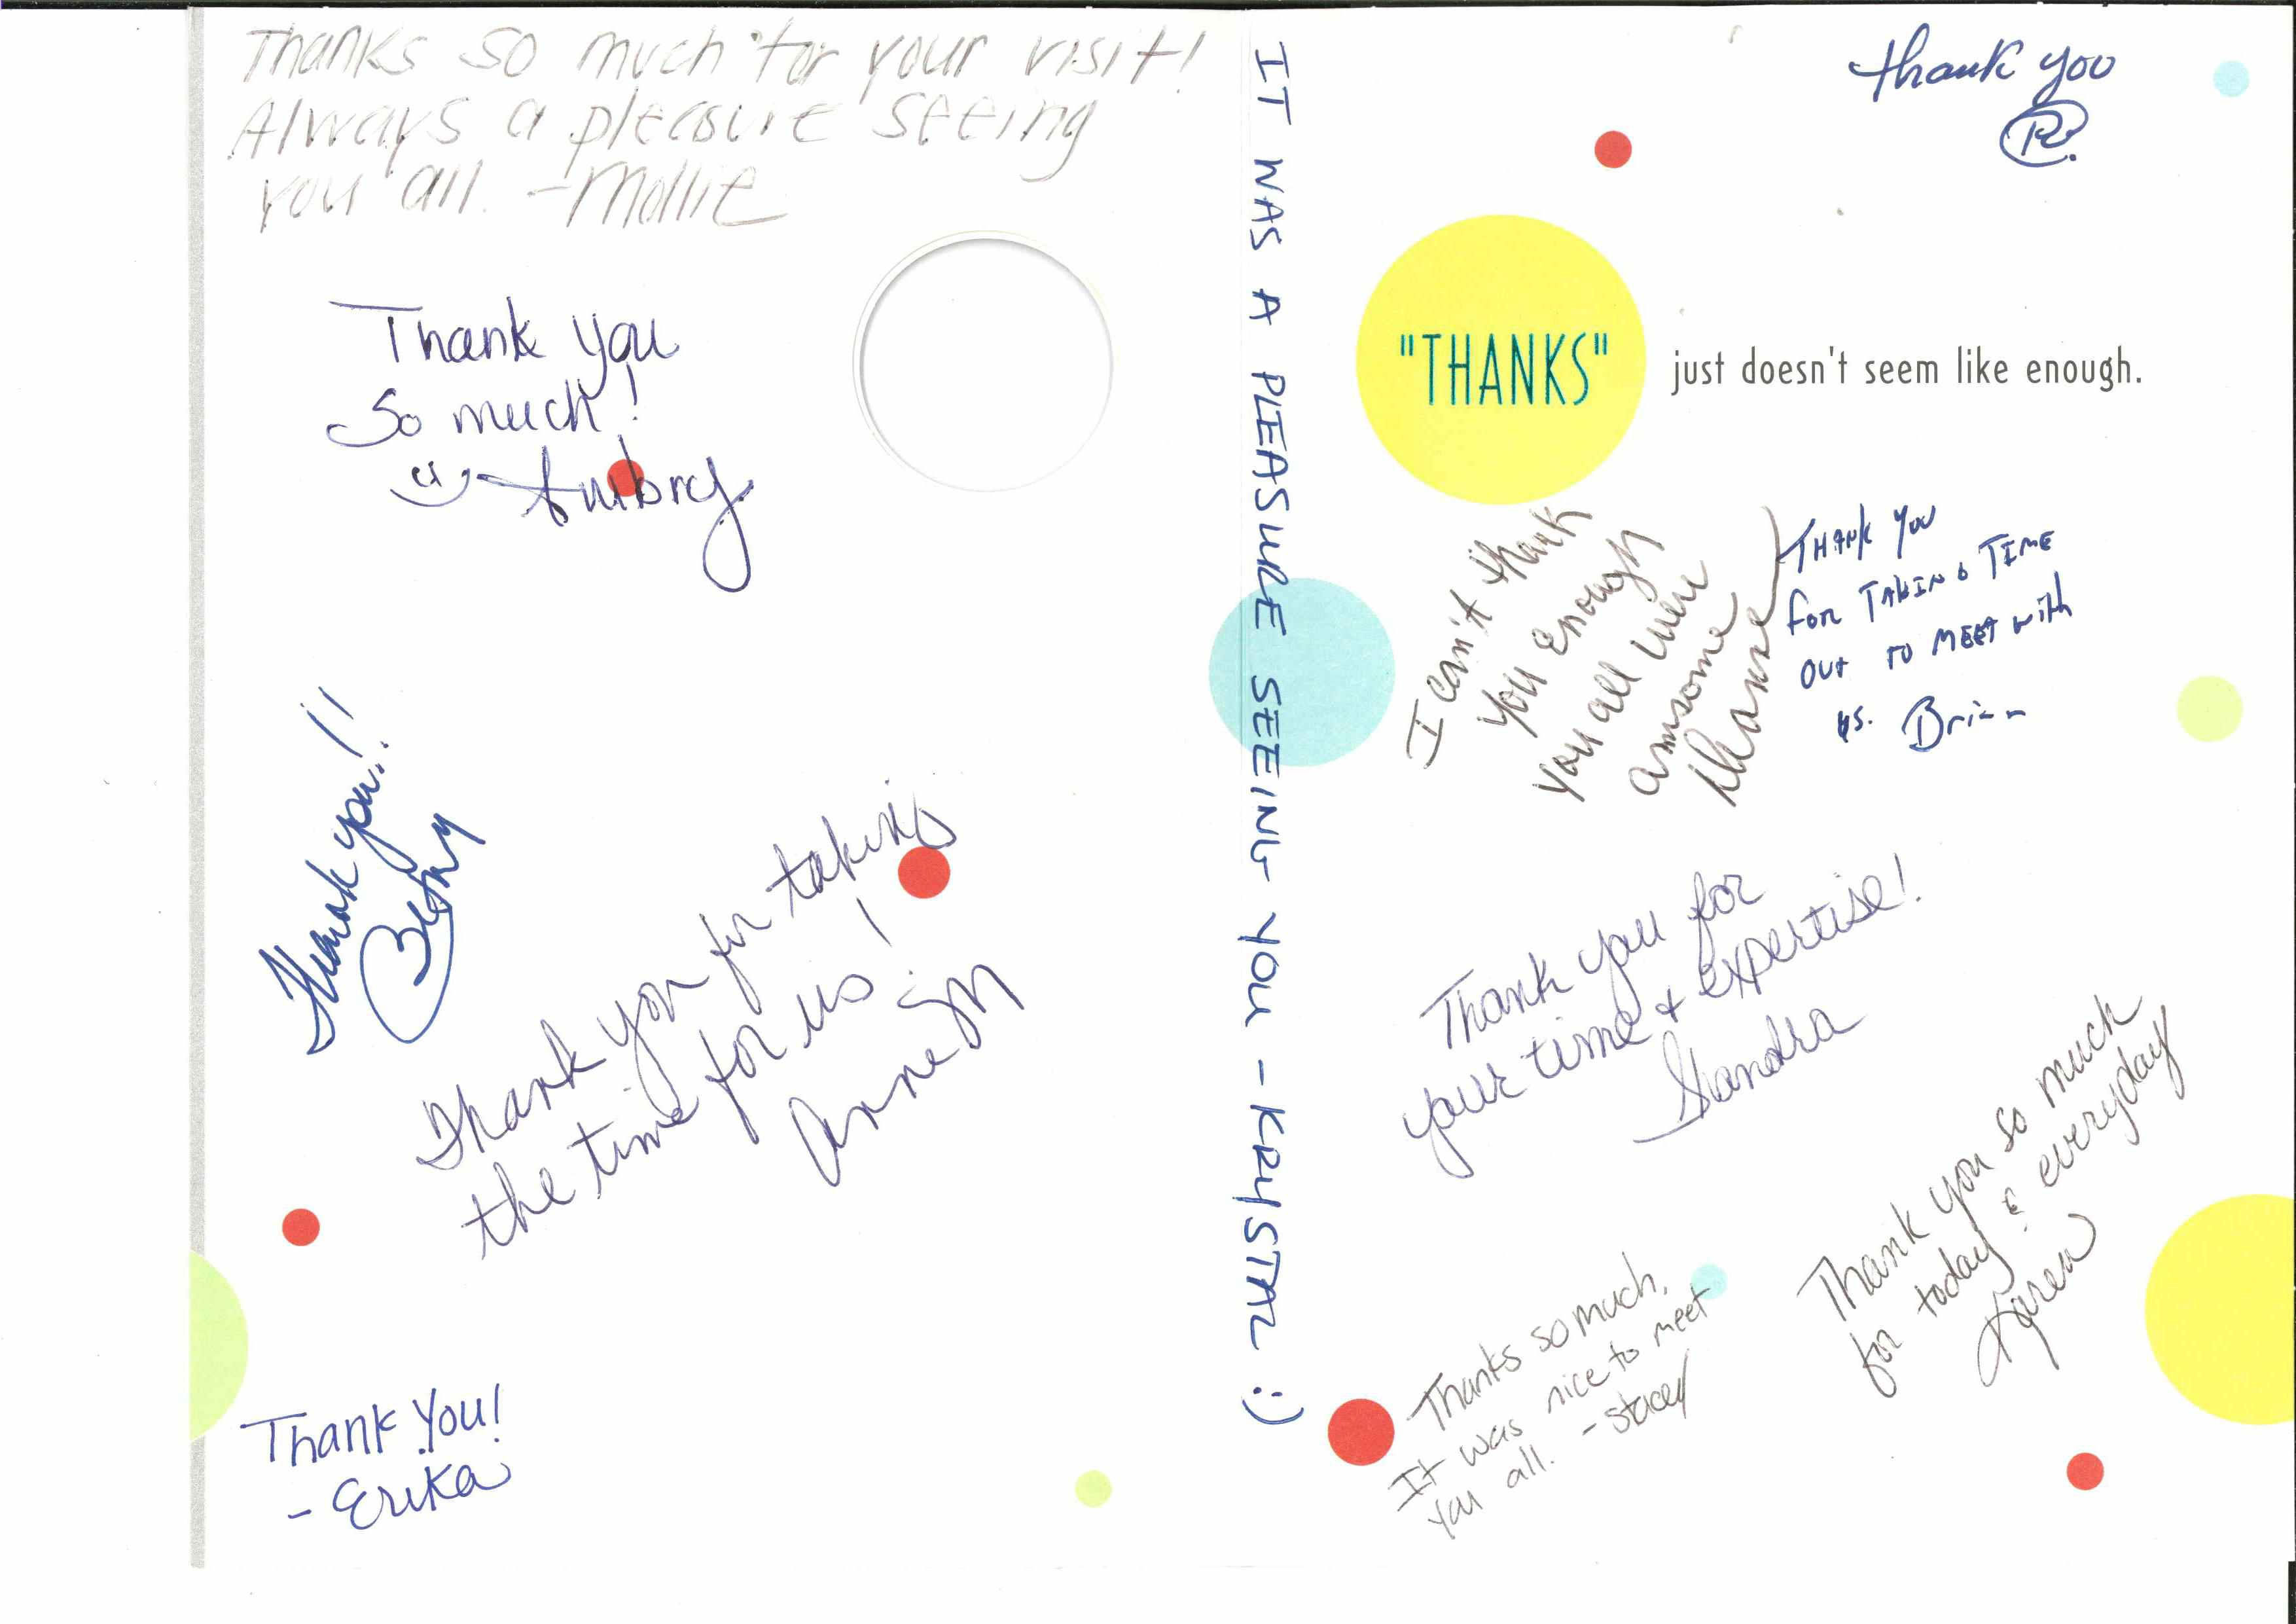 Thank you card DB/Section 3 training class